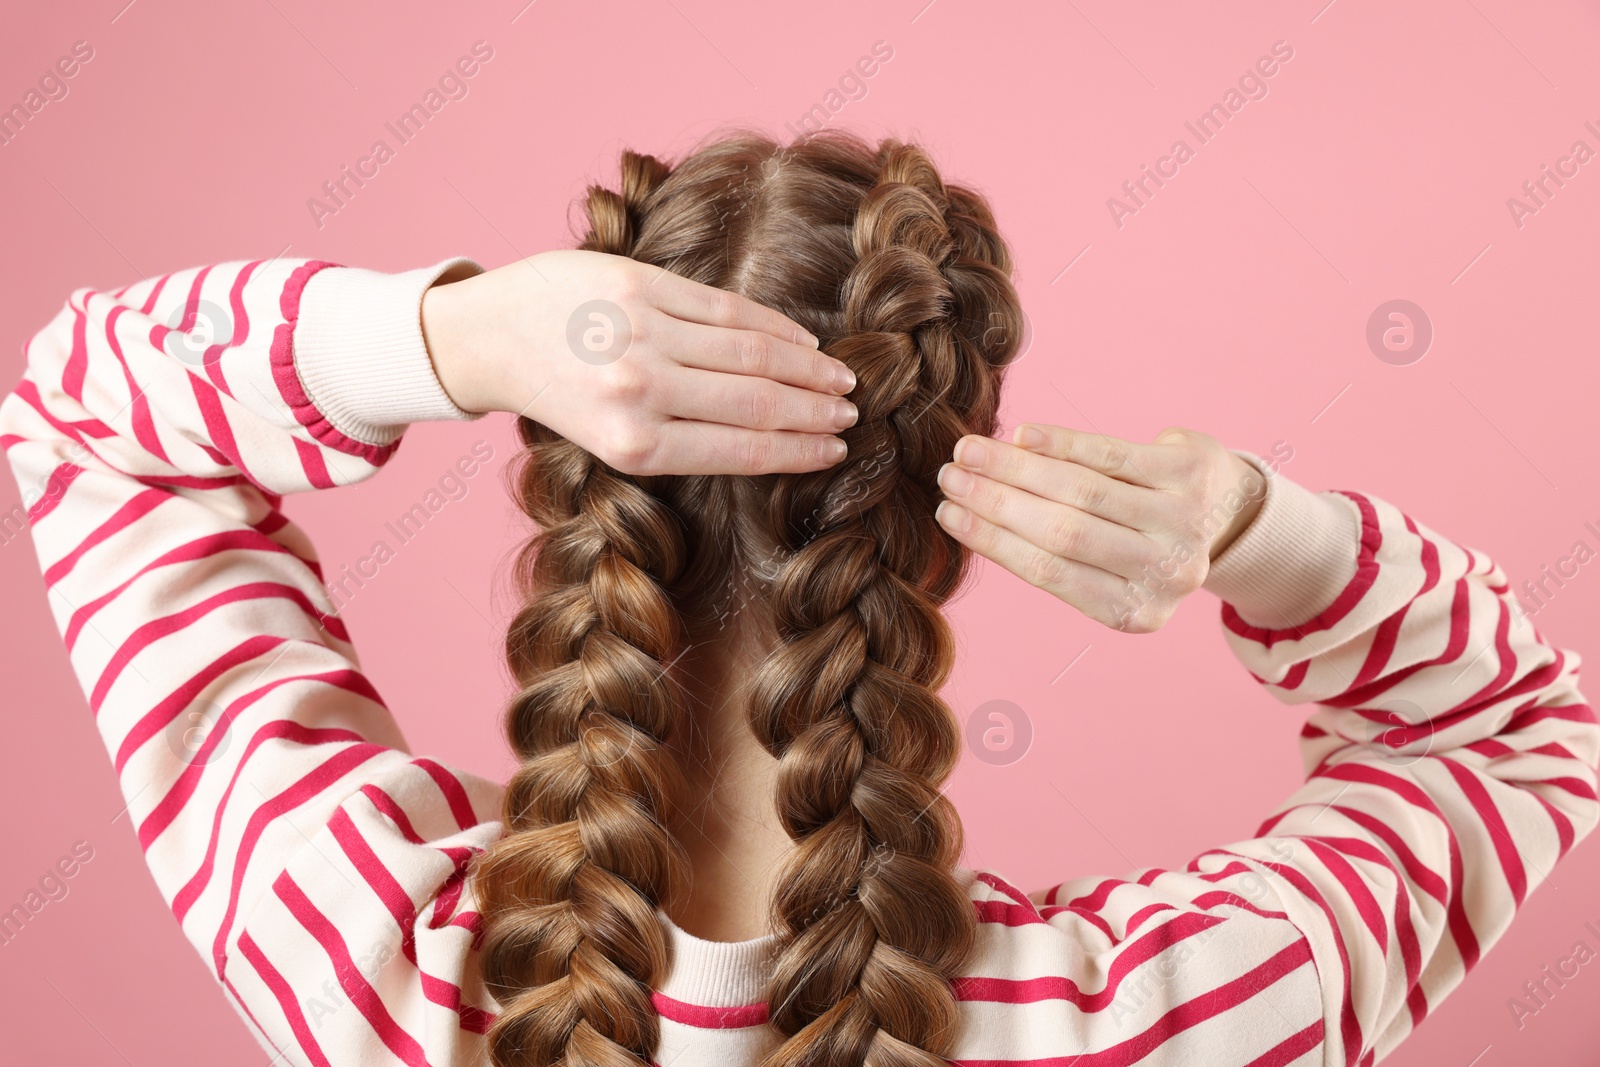 Photo of Woman with braided hair on pink background, back view